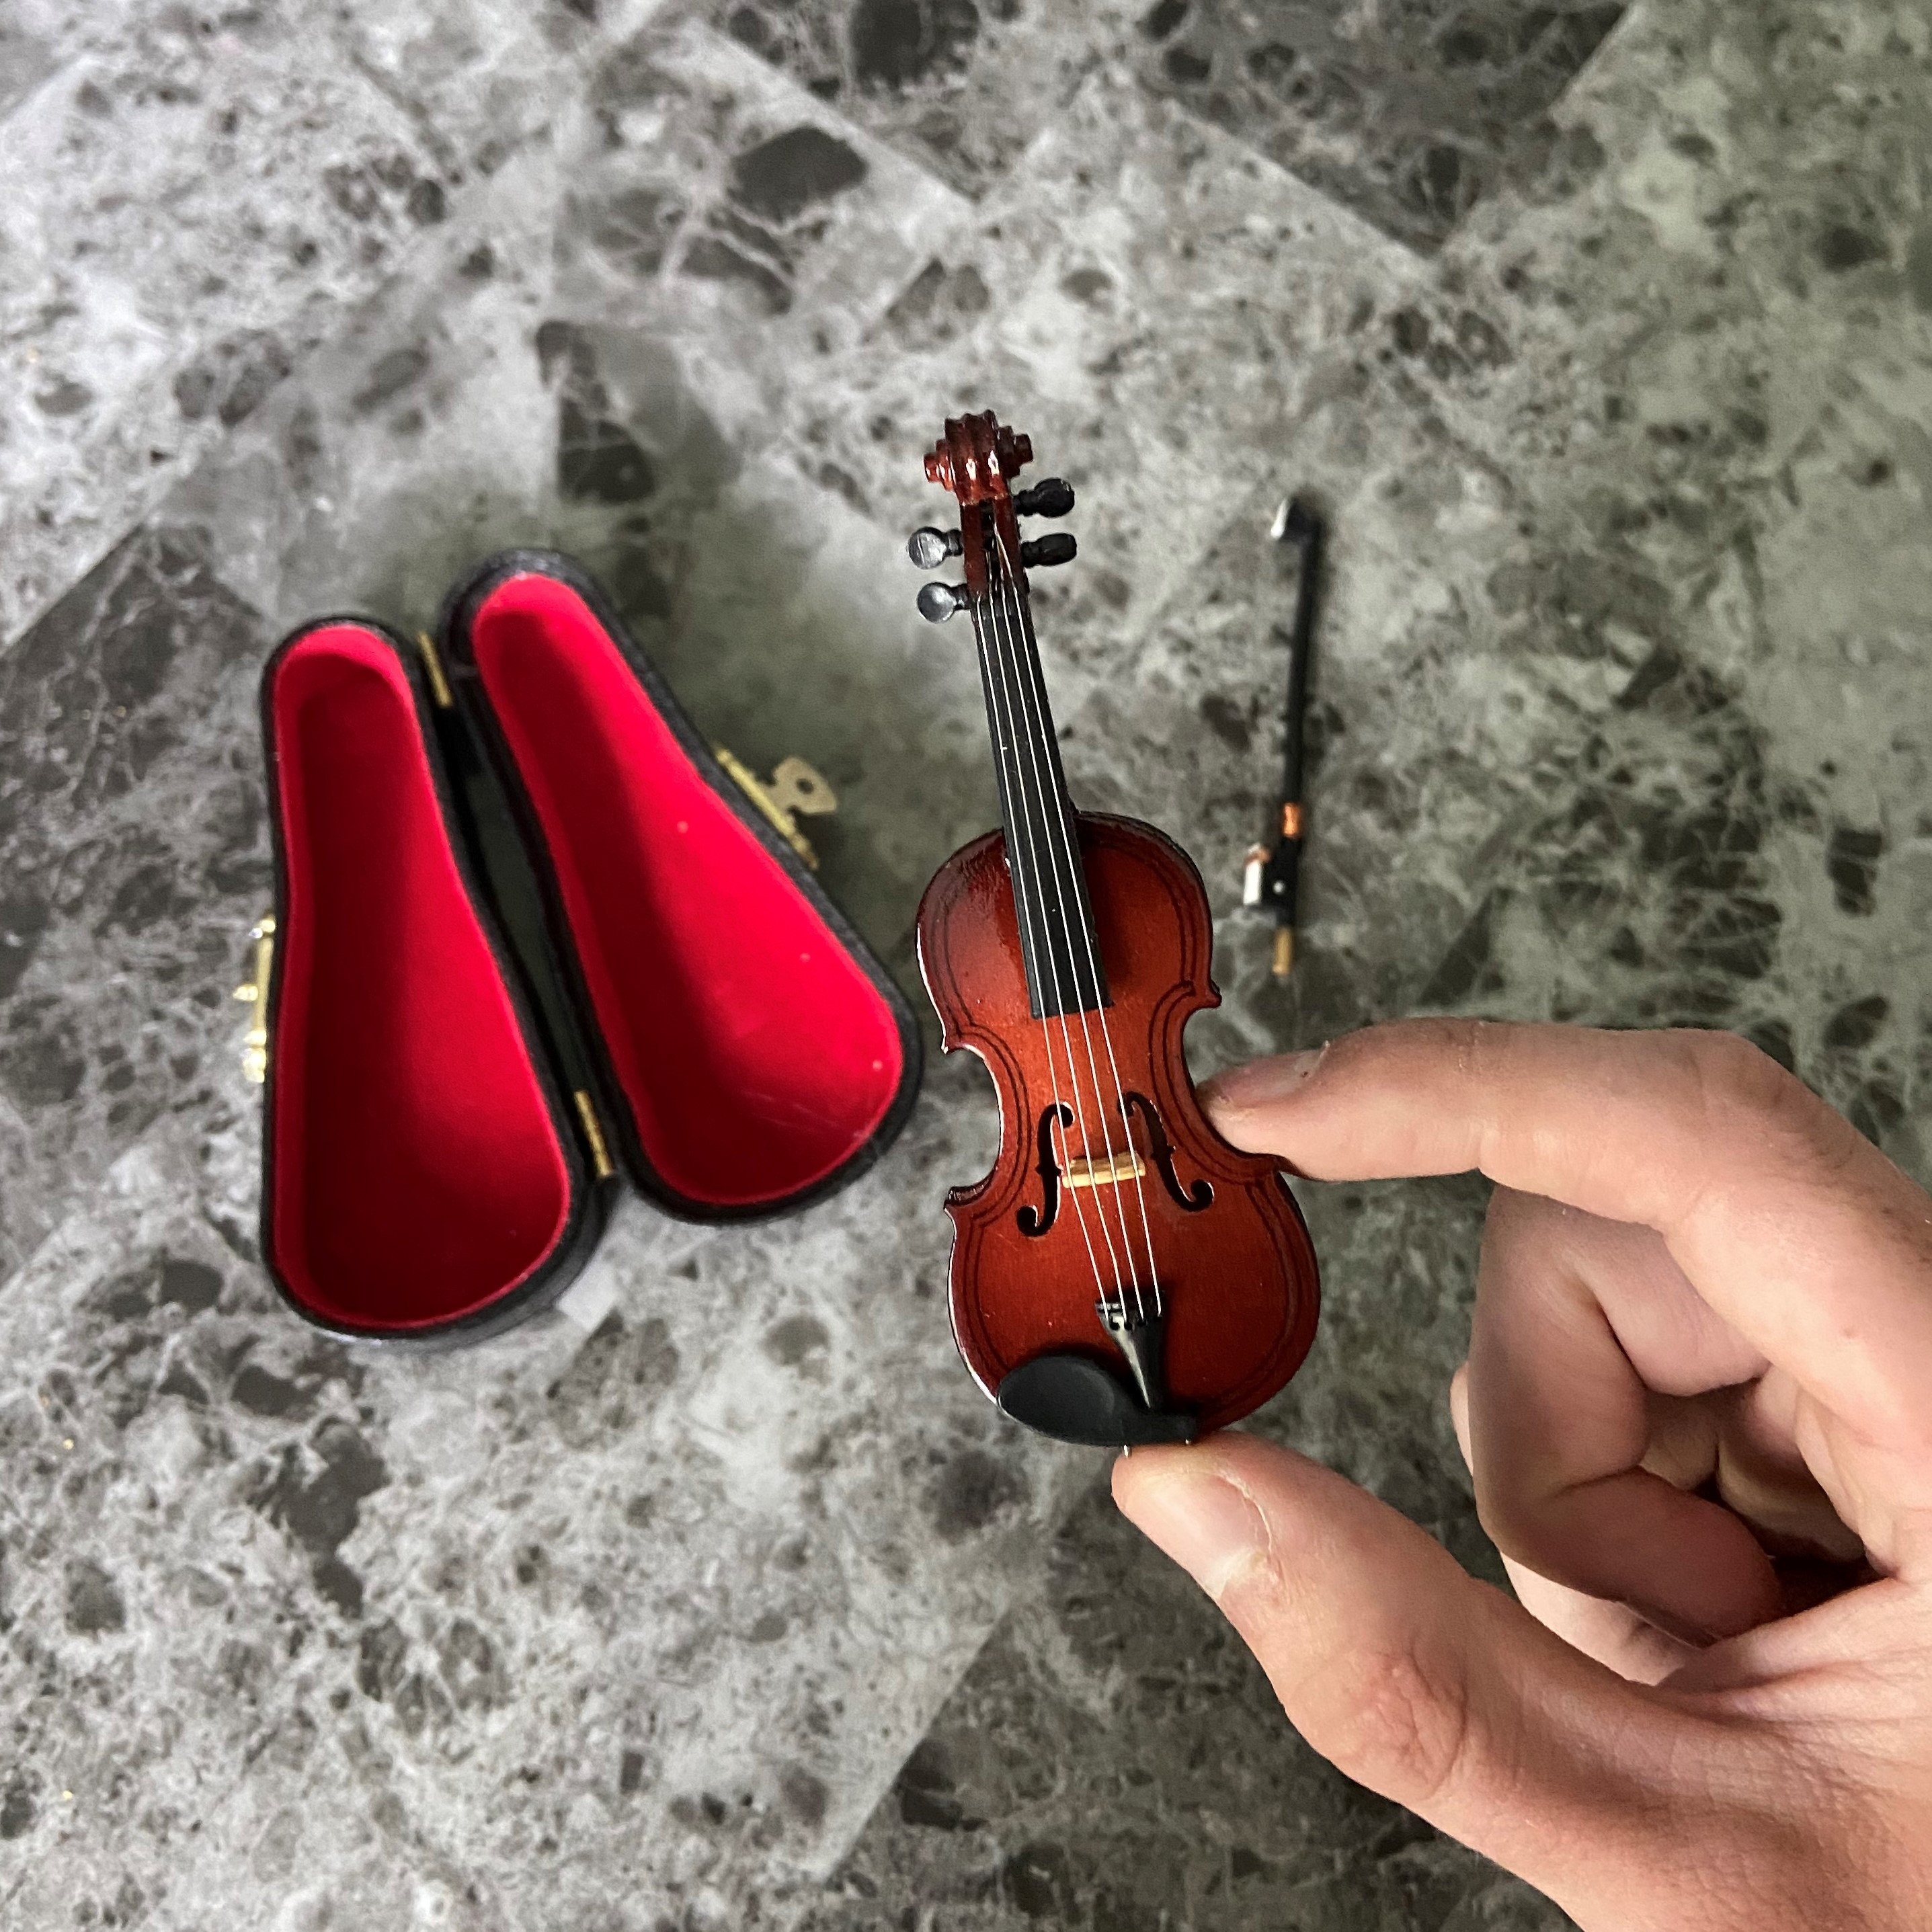 World's Smallest Violin Keychain Playable With Music Send Your Condolences  Novelty Prank Gag Funny Joke Gift Toy 